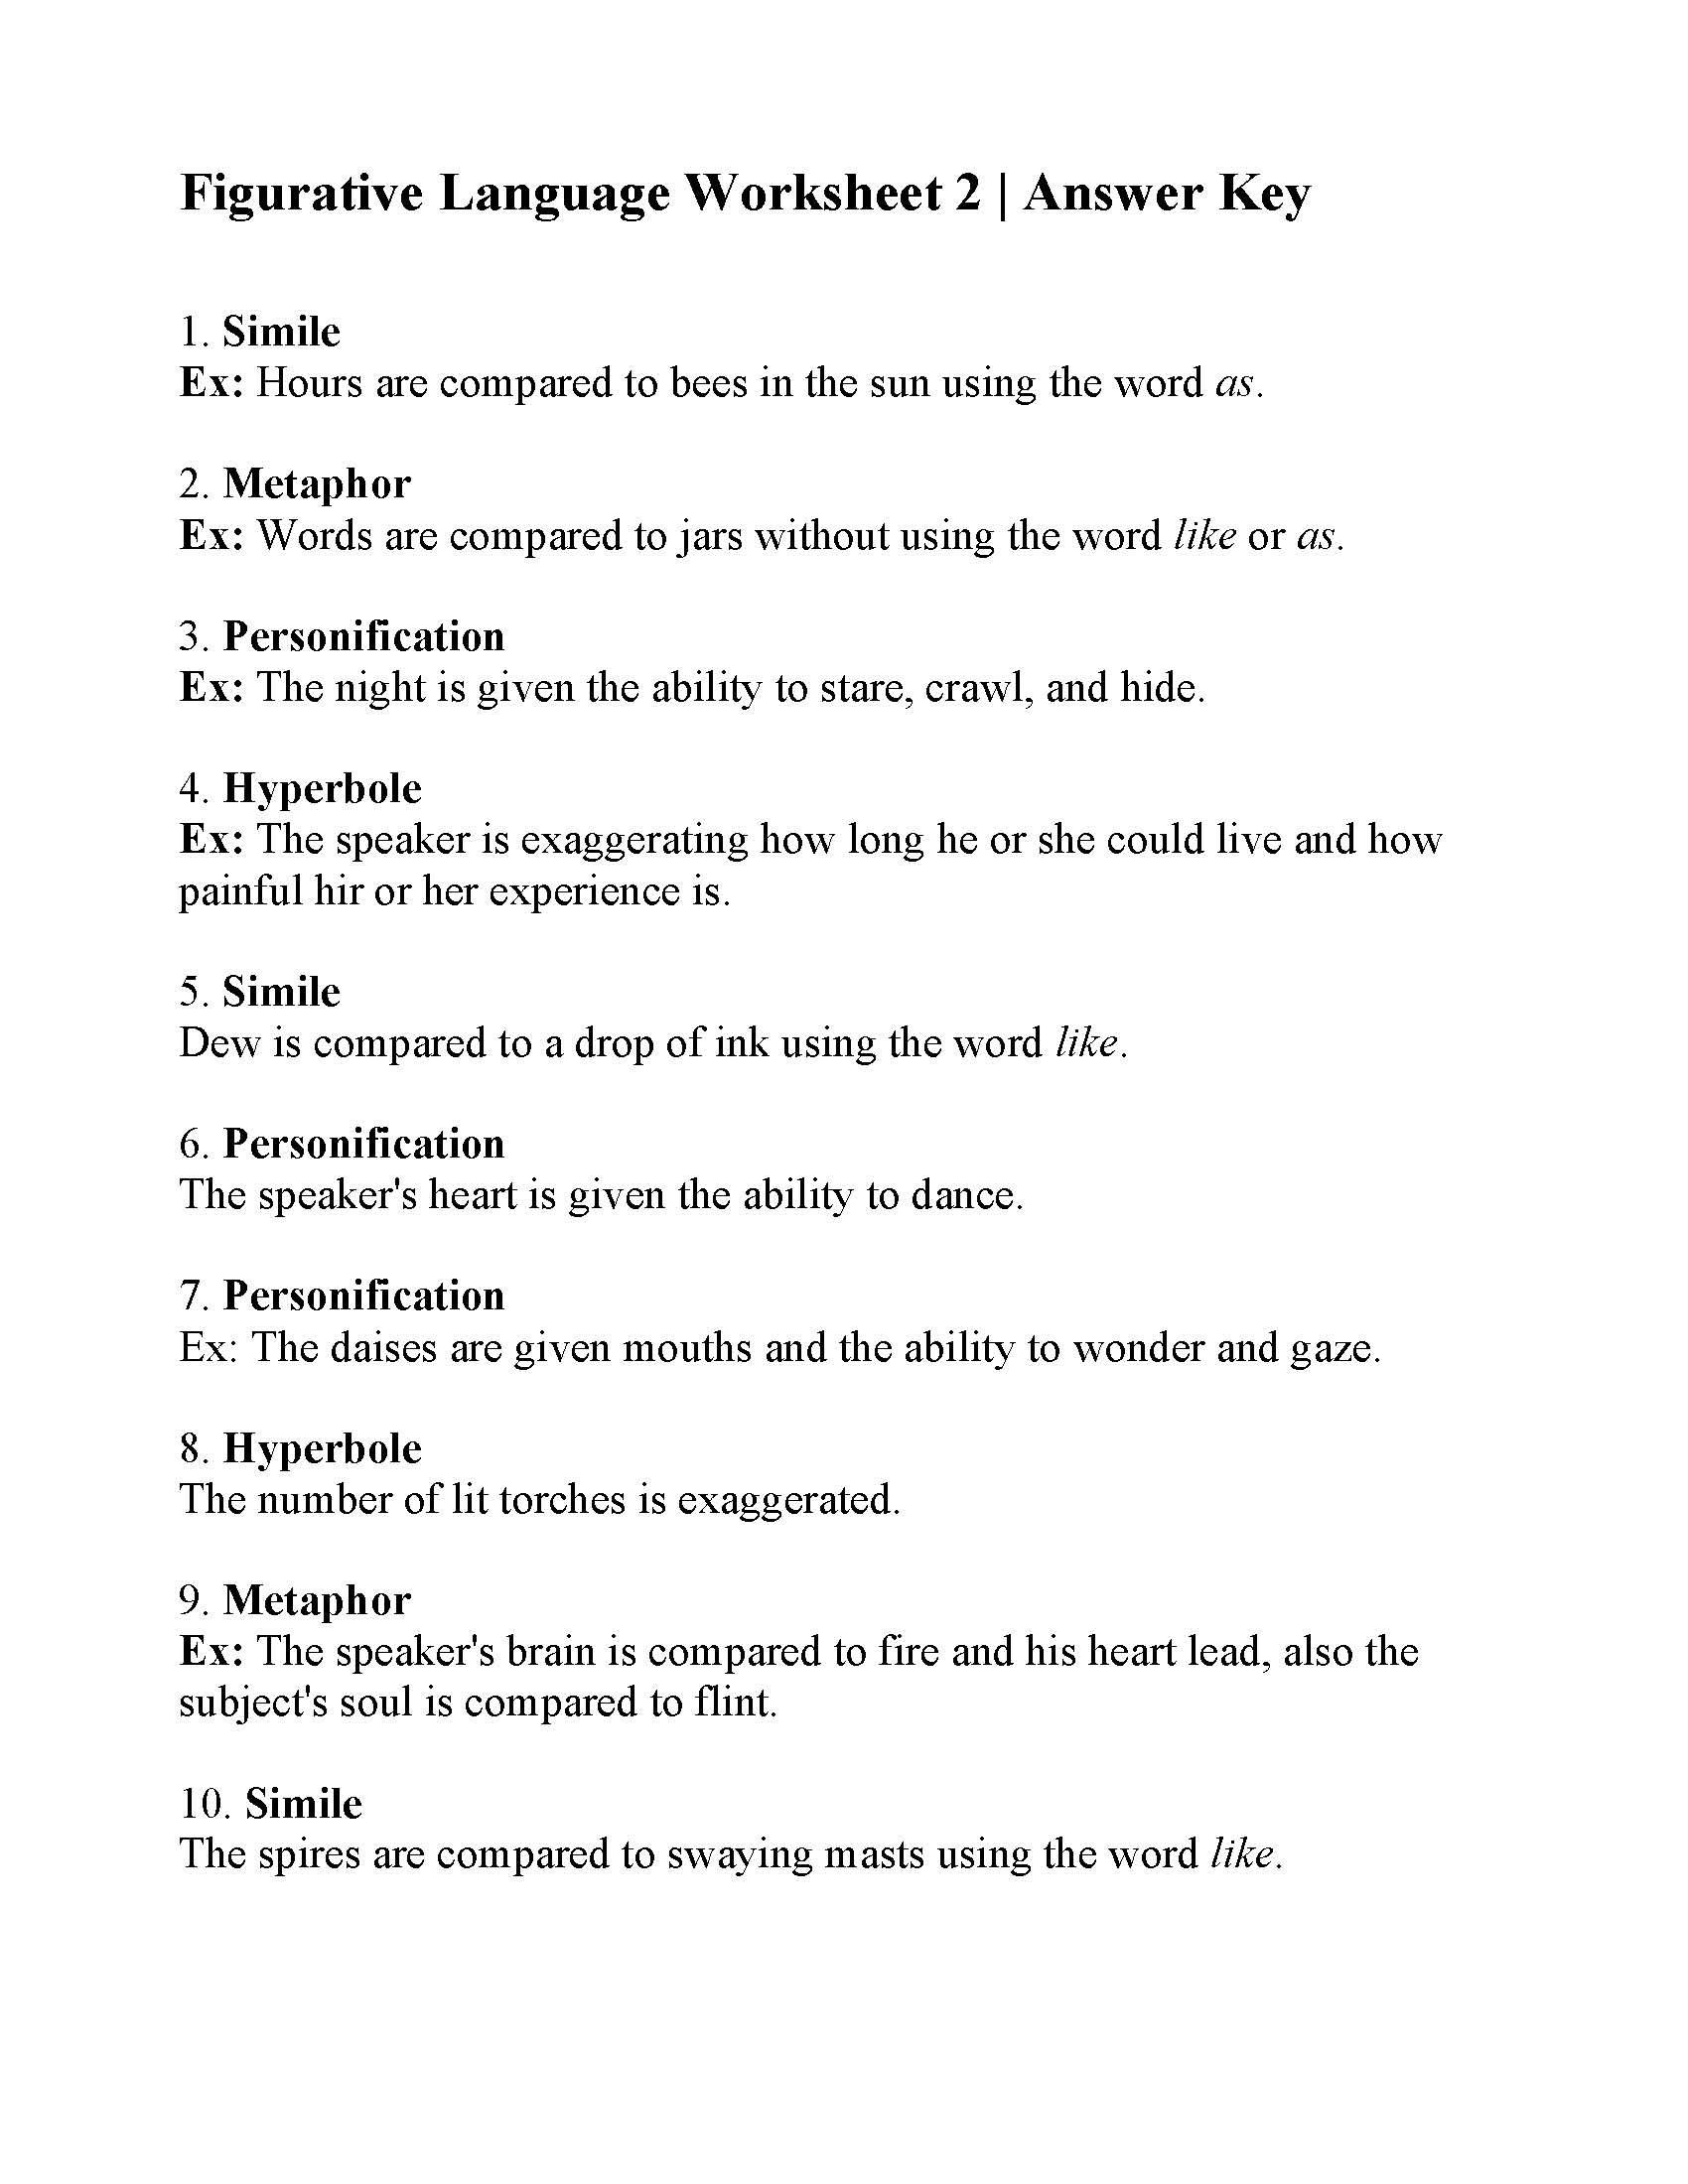 Simile Metaphor Personification Worksheet This is the Answer Key for the Figurative Language Worksheet